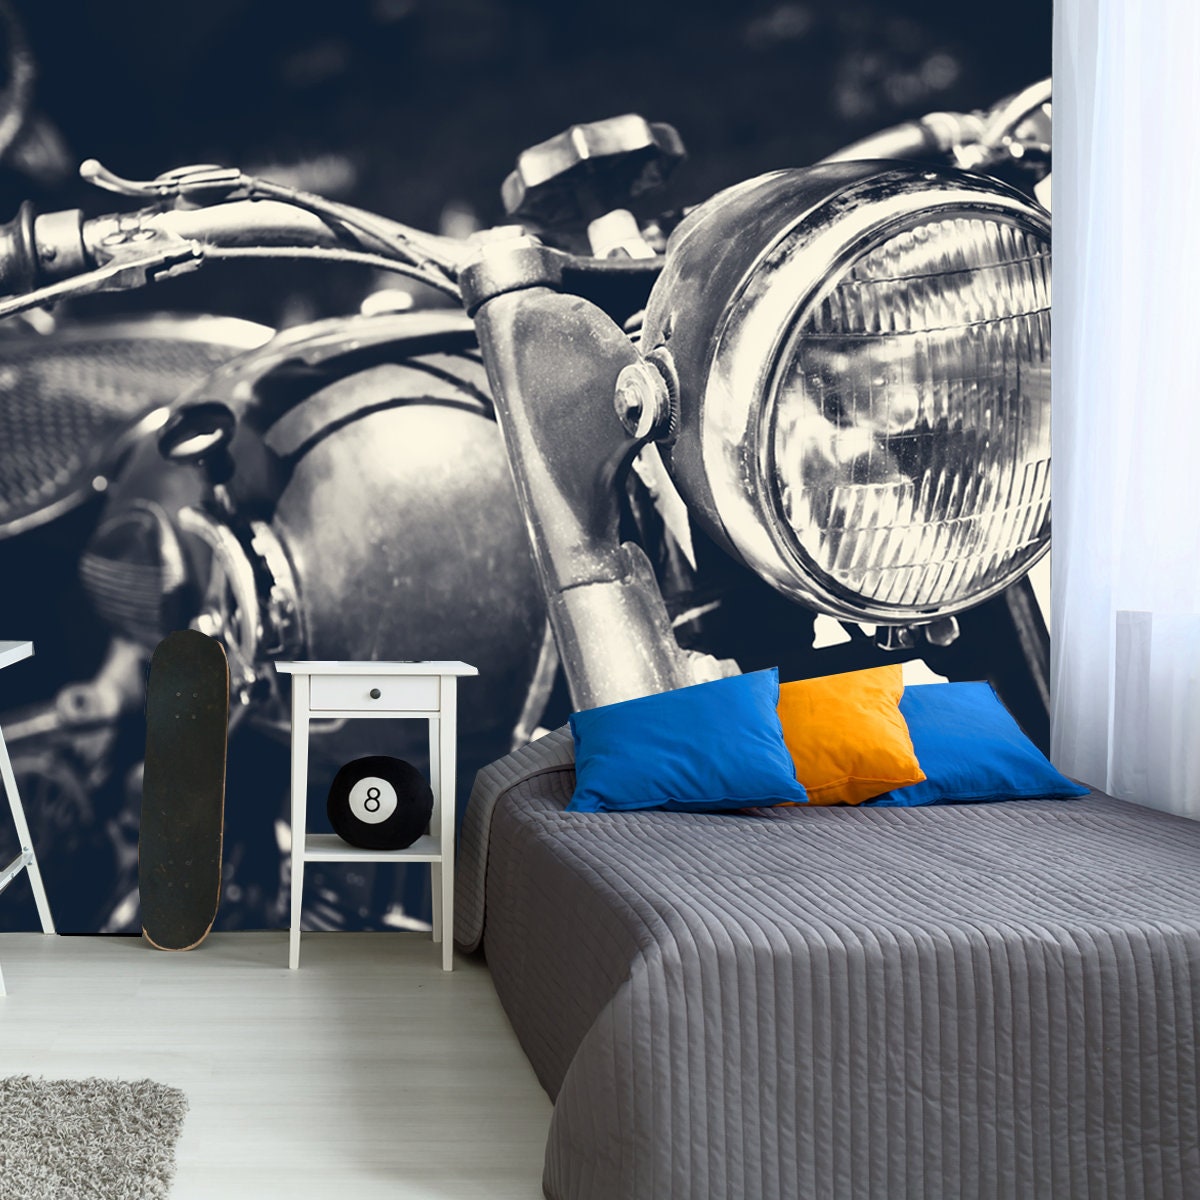 Vintage Motorbike, Focus on a Headlamp. Retro Motorcycle with Headlight on Black and White Color Wallpaper Boy Bedroom Mural